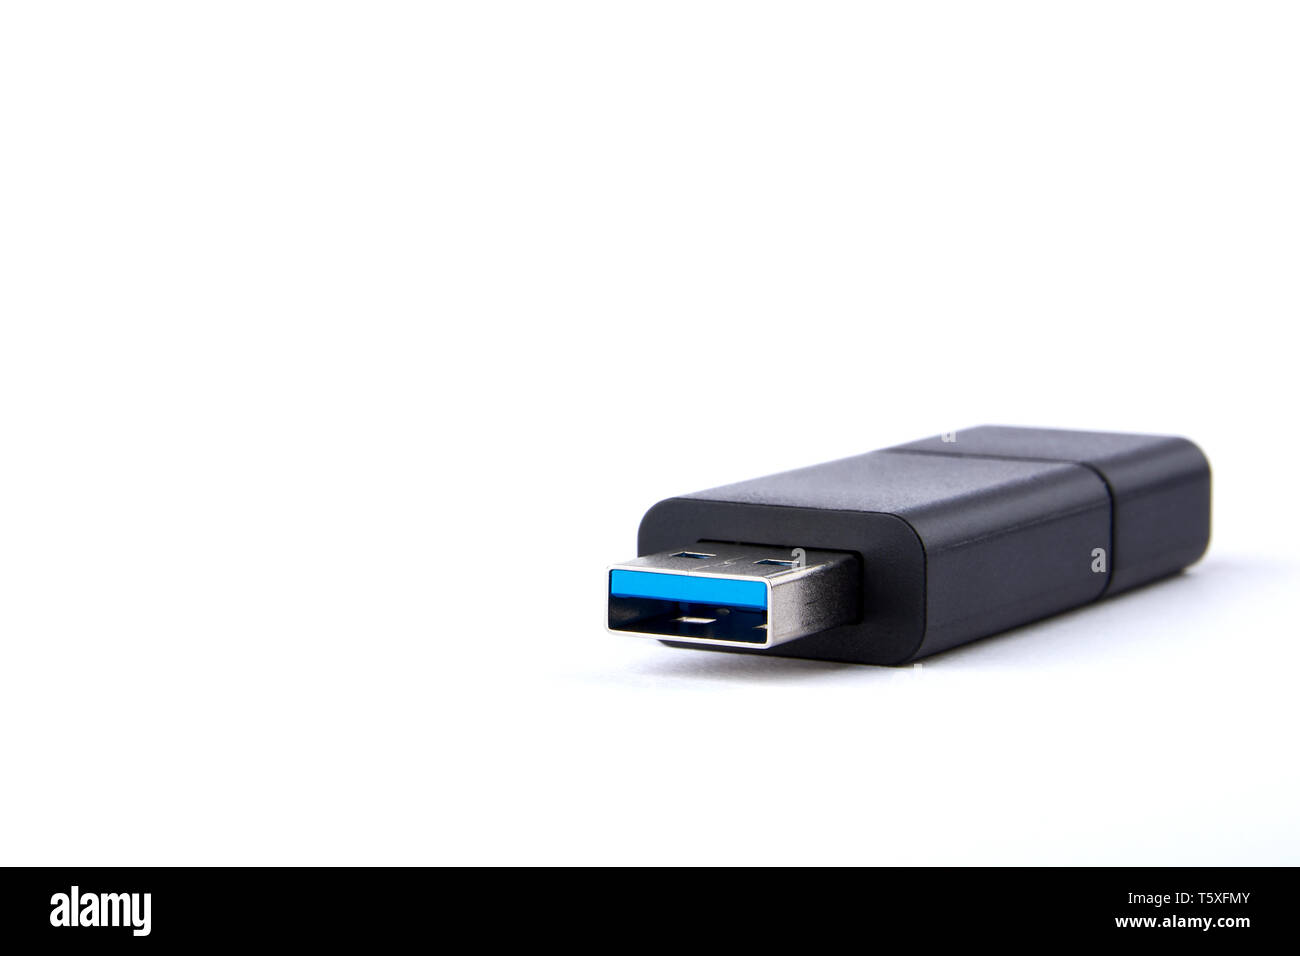 Detailed view of black USB flash drive with silver blue connector. Photo on white background with space for your text. Stock Photo